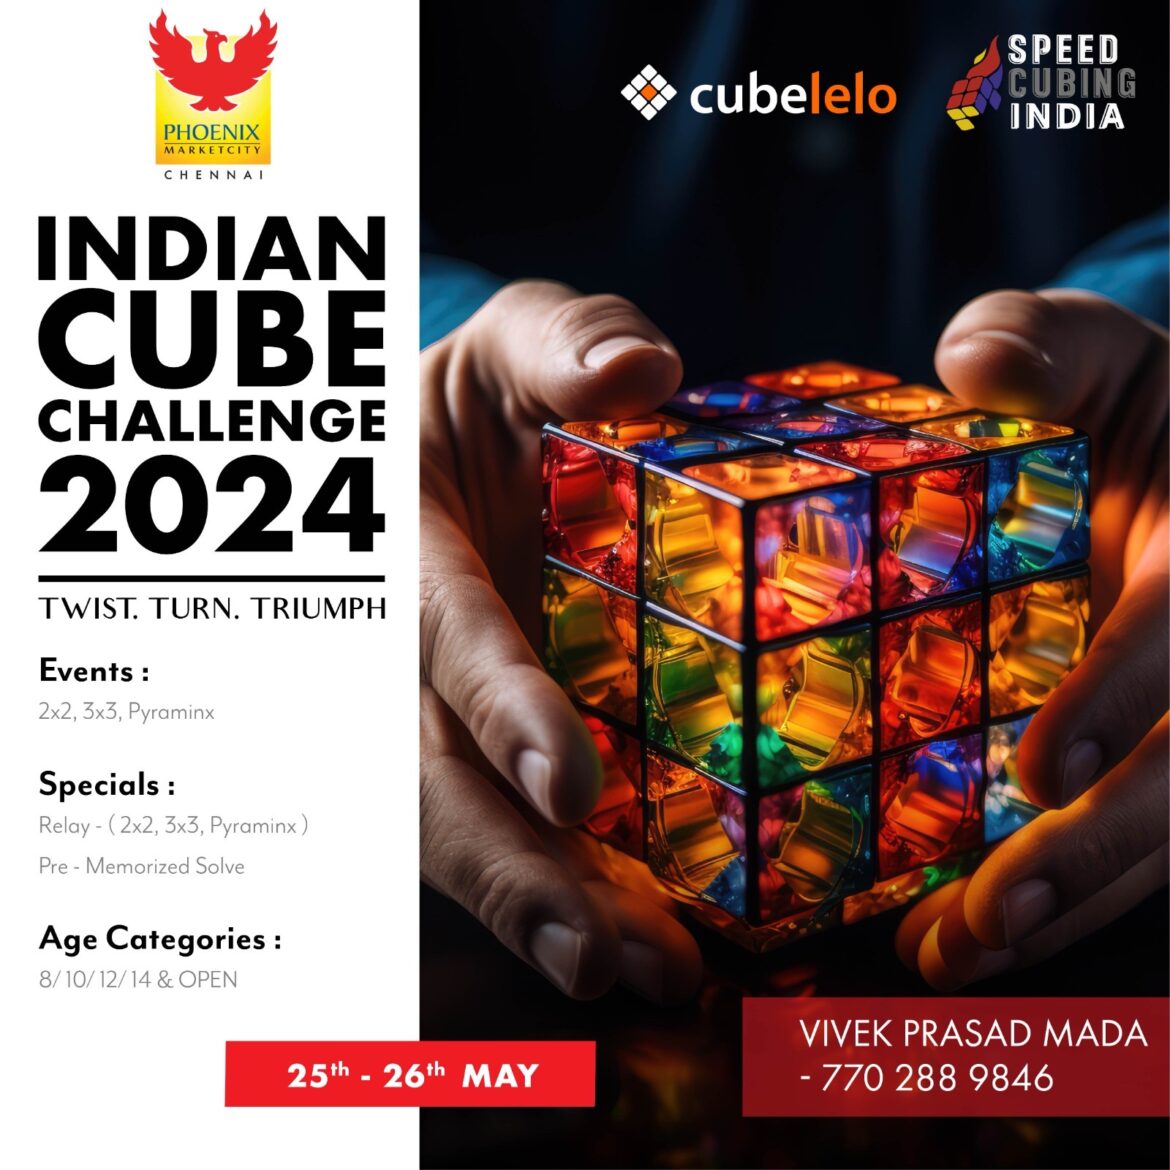 Phoenix Marketcity Chennai to Host an Exciting Indian Cube Challenge this Weekend at Holiday Land  